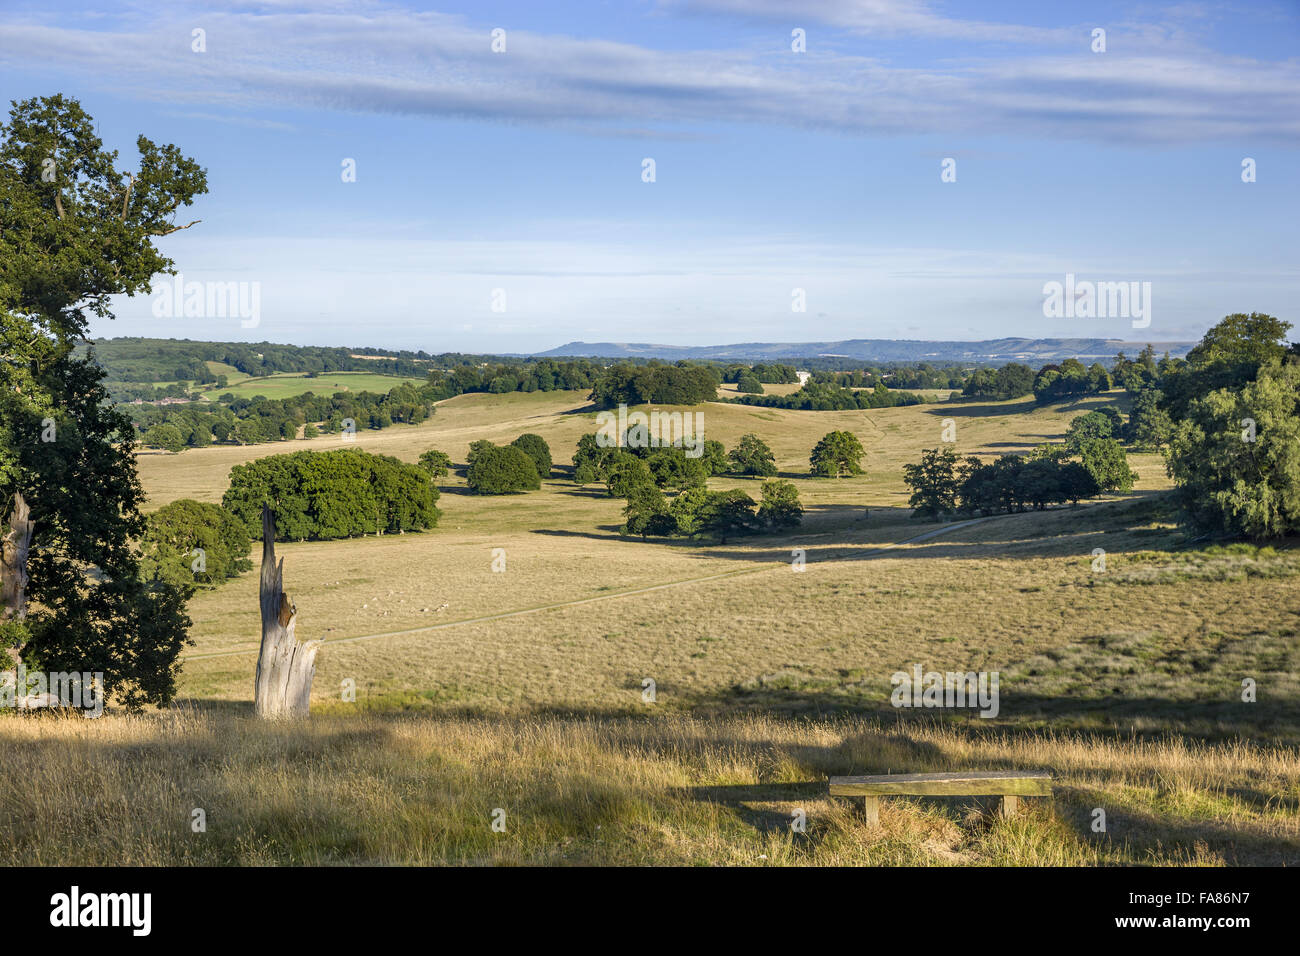 Looking south east, towards the house, from the Concave, at Petworth House and Park, West Sussex. The deer park at Petworth was landscaped by 'Capability' Brown. Stock Photo